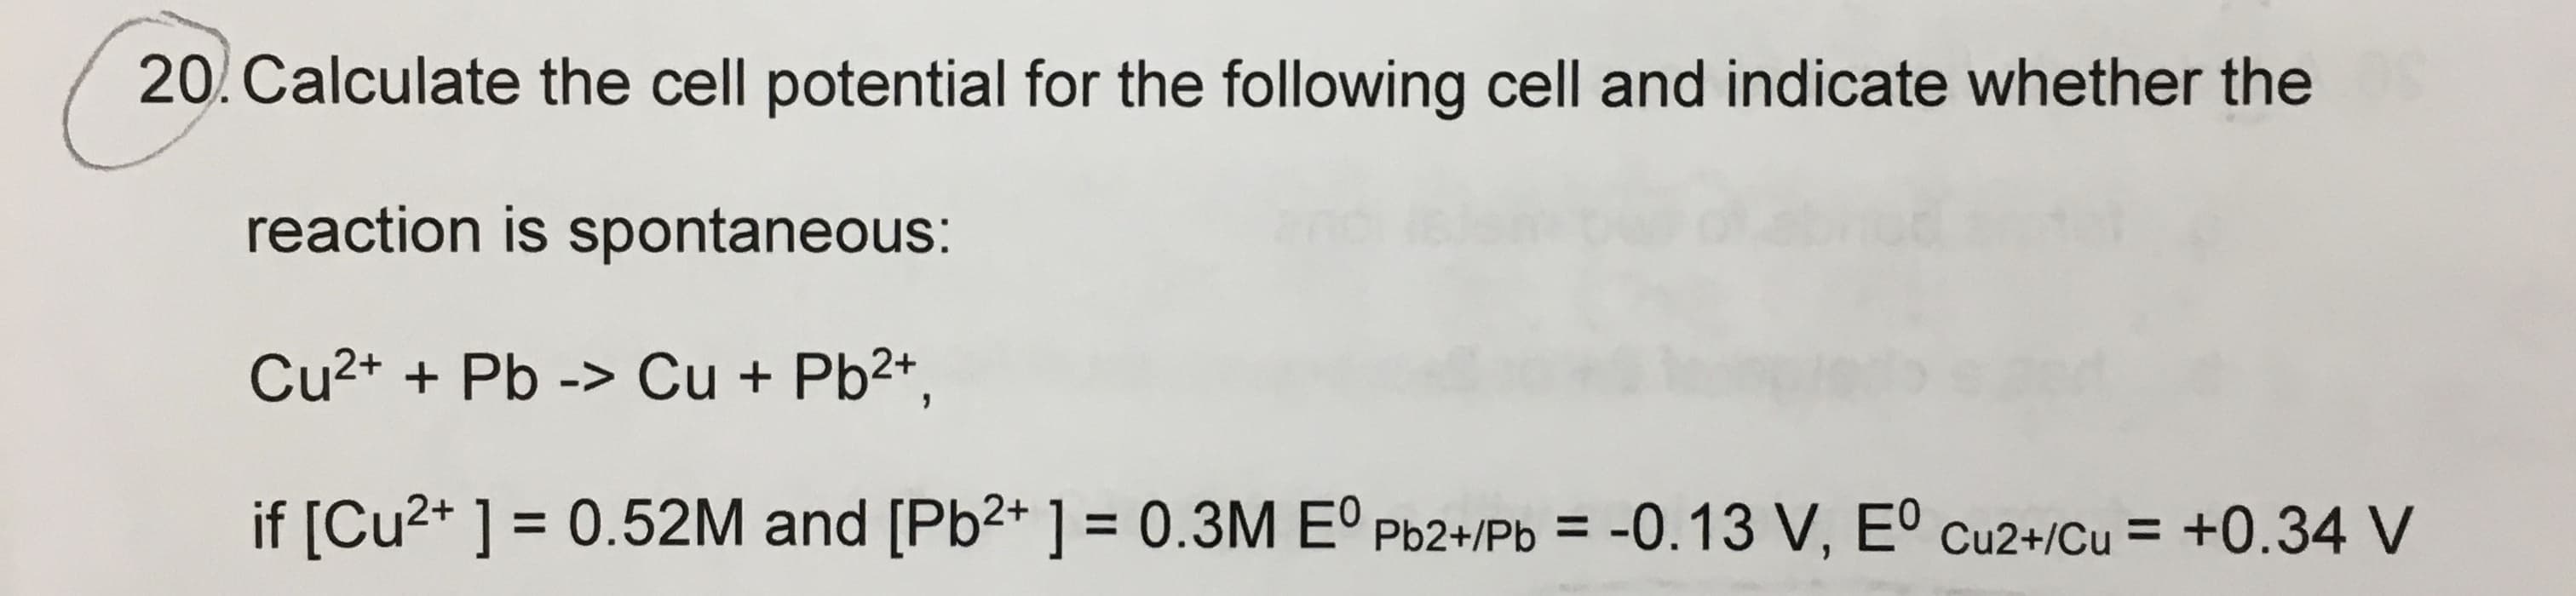 20. Calculate the cell potential for the following cell and indicate whether the
reaction is spontaneous:
Cu2+ + Pb -> Cu + Pb2+,
if [Cu2+ ] = 0.52M and [Pb2* ] = 0.3M Eº Pb2+/Pb =
-0.13 V, Eº cu2+/Cu = +0.34 V
%D
%3D
%3D
